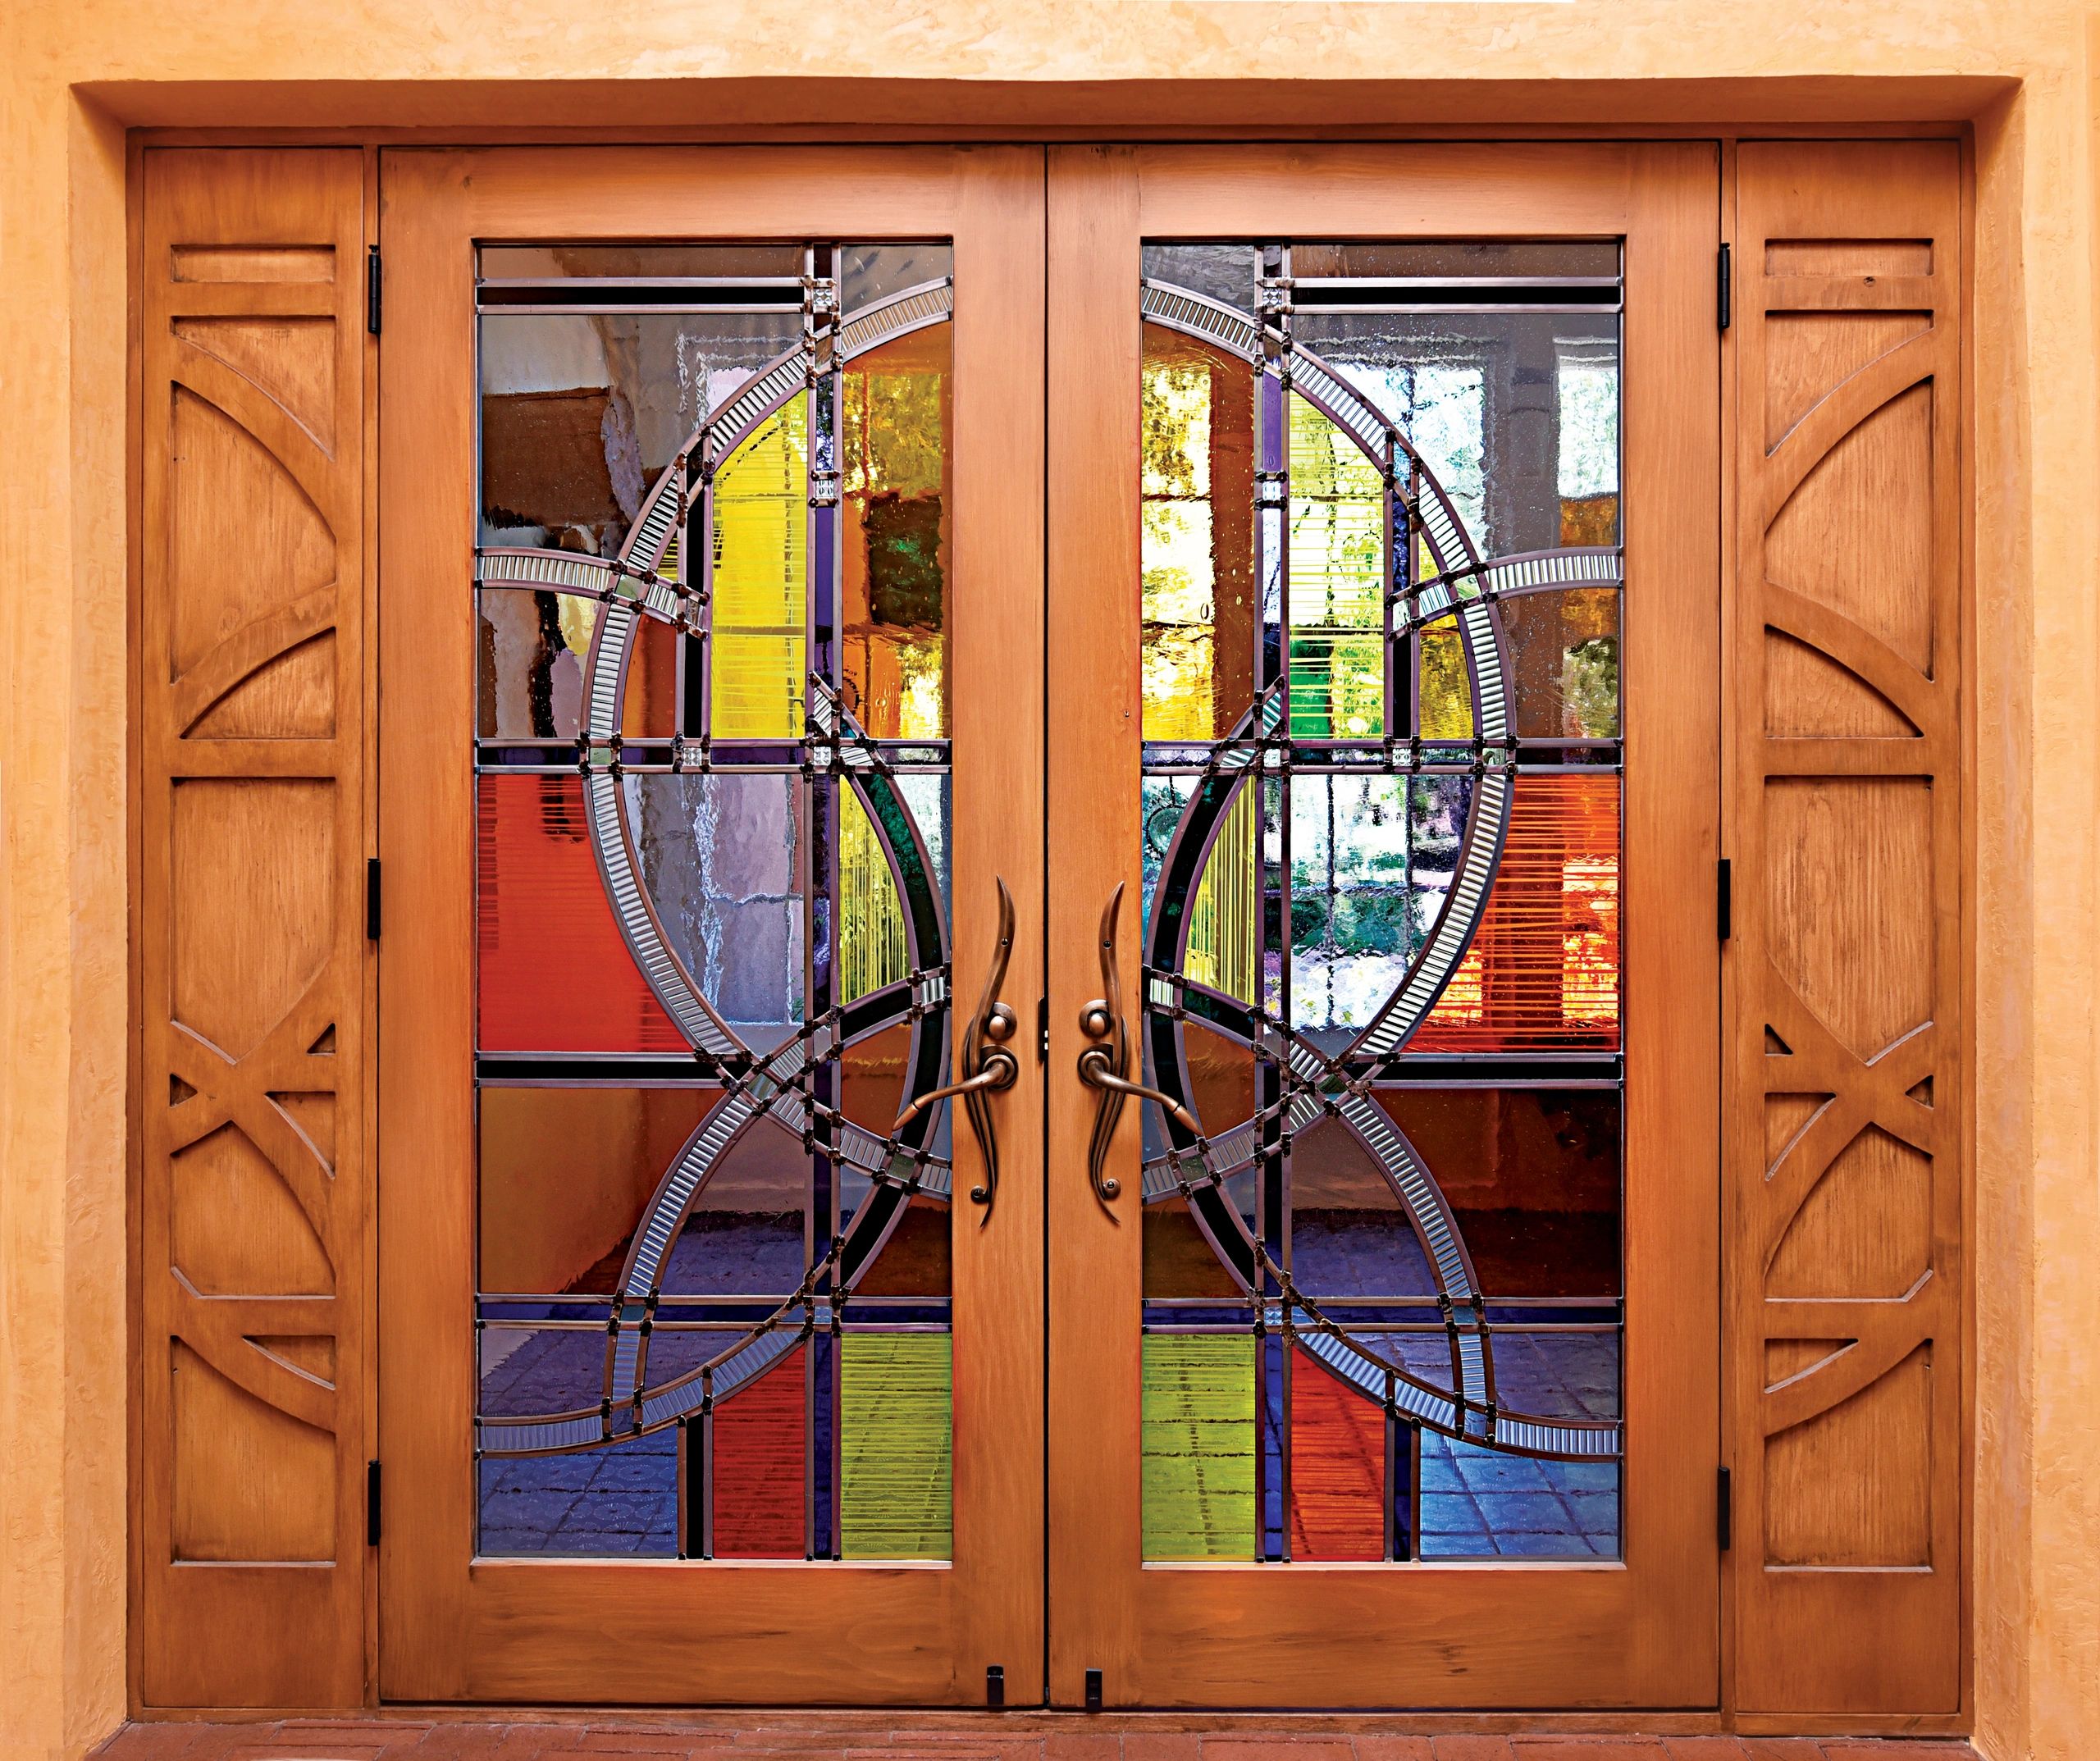 large double door entry with sandblasted yellows, oranges and blue stained glass